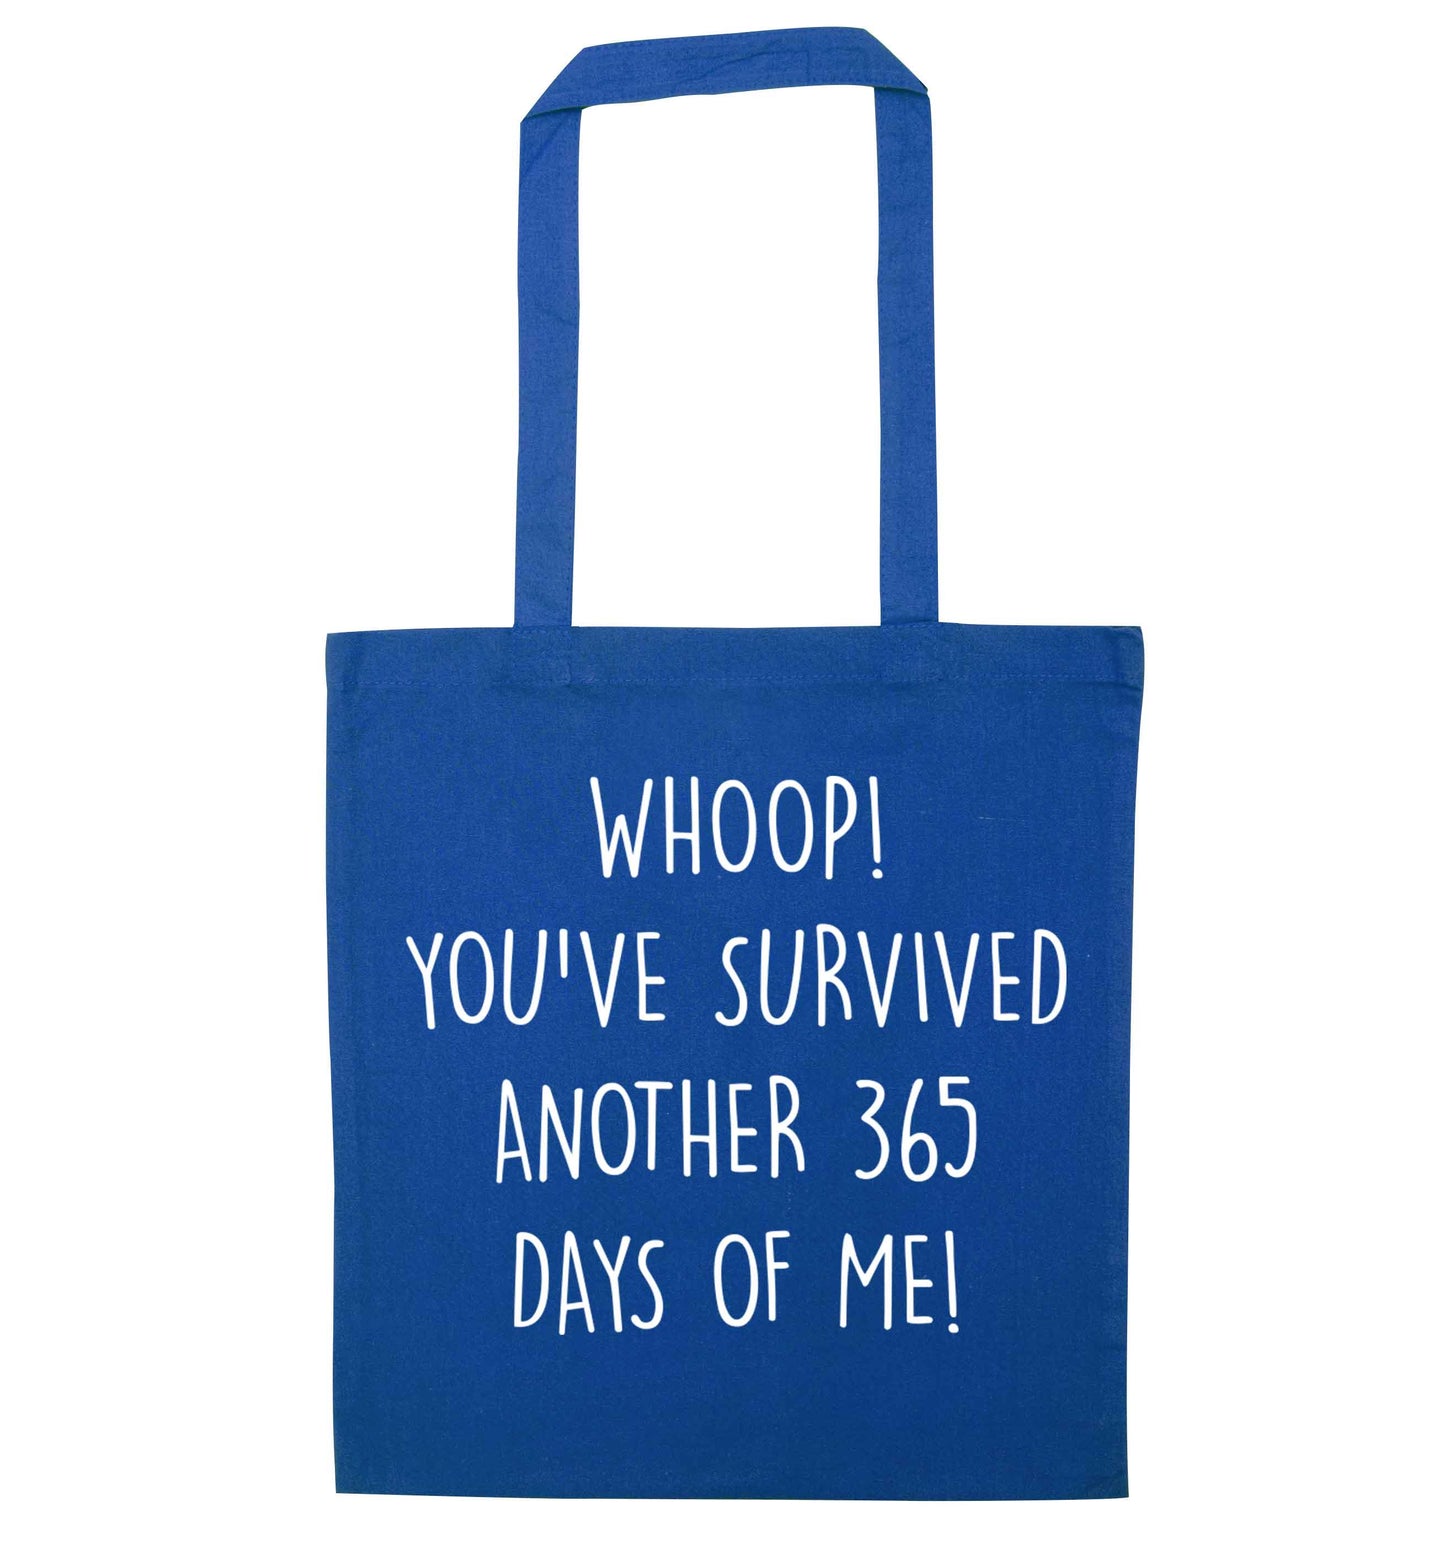 Whoop! You've survived another 365 days with me! blue tote bag